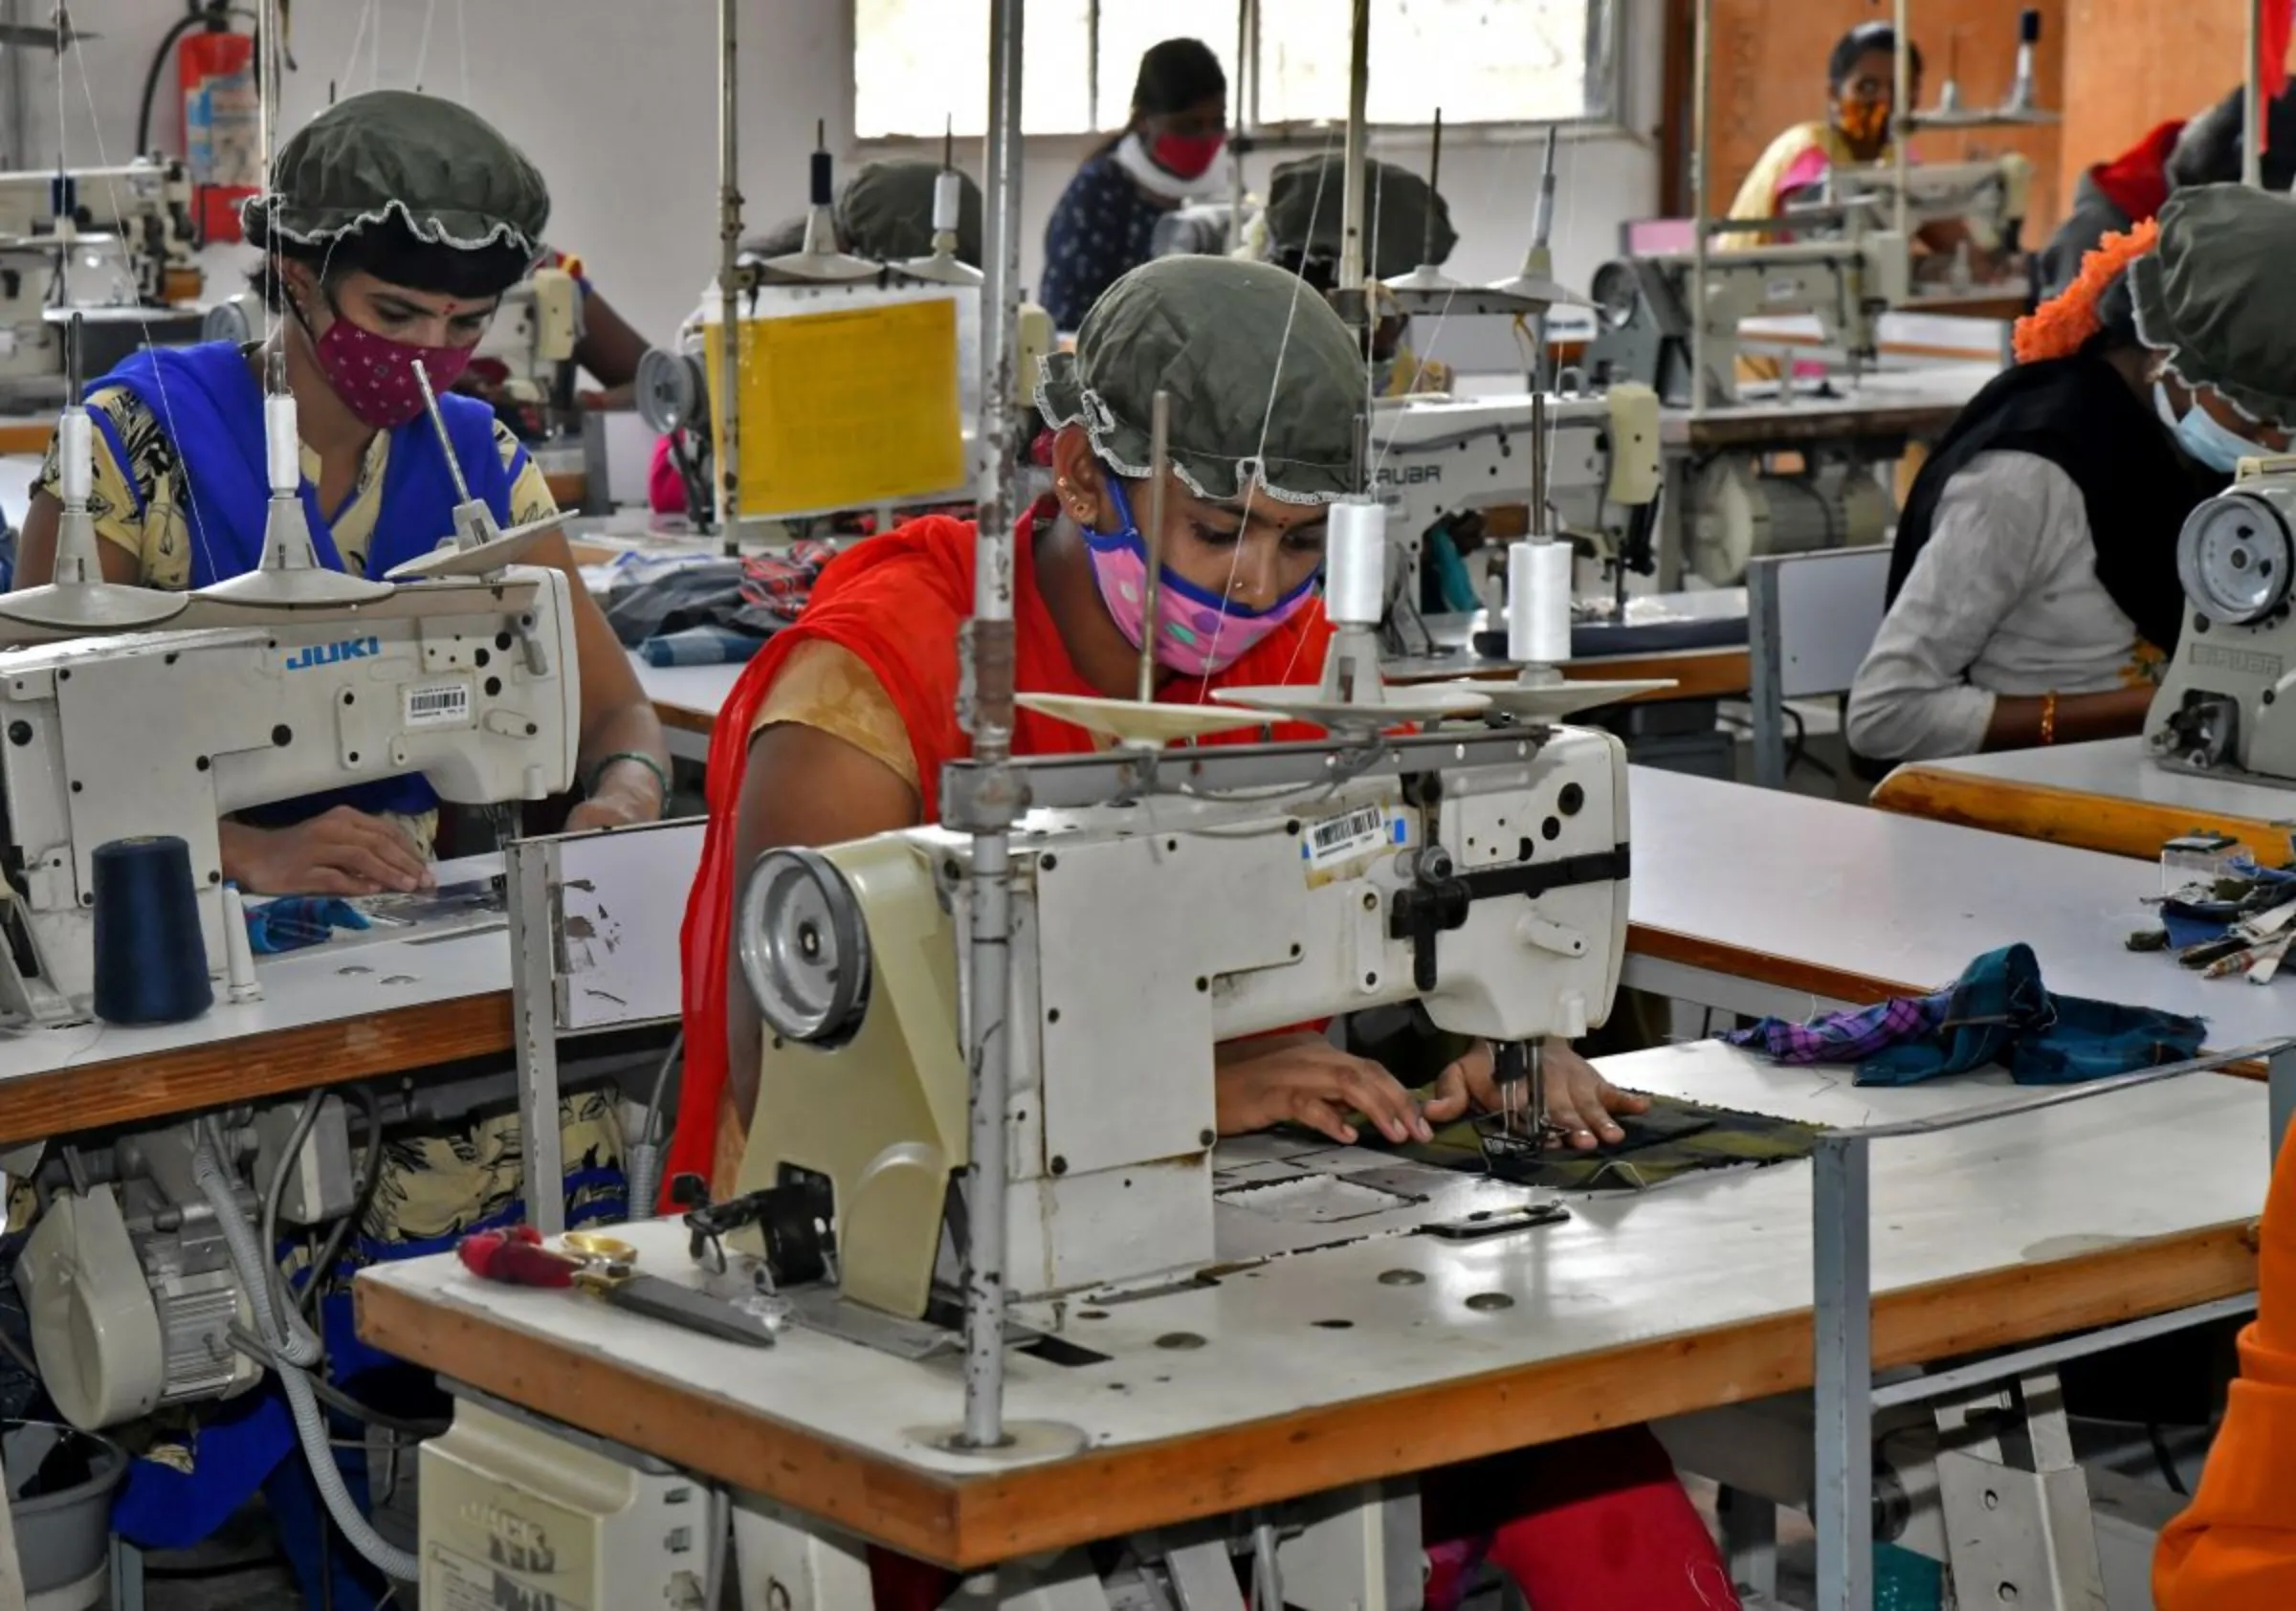 Newly recruited garment workers practice stitching at a textile factory of Texport Industries in Hindupur town in the southern state of Andhra Pradesh, India, February 9, 2022. REUTERS/Samuel Rajkumar